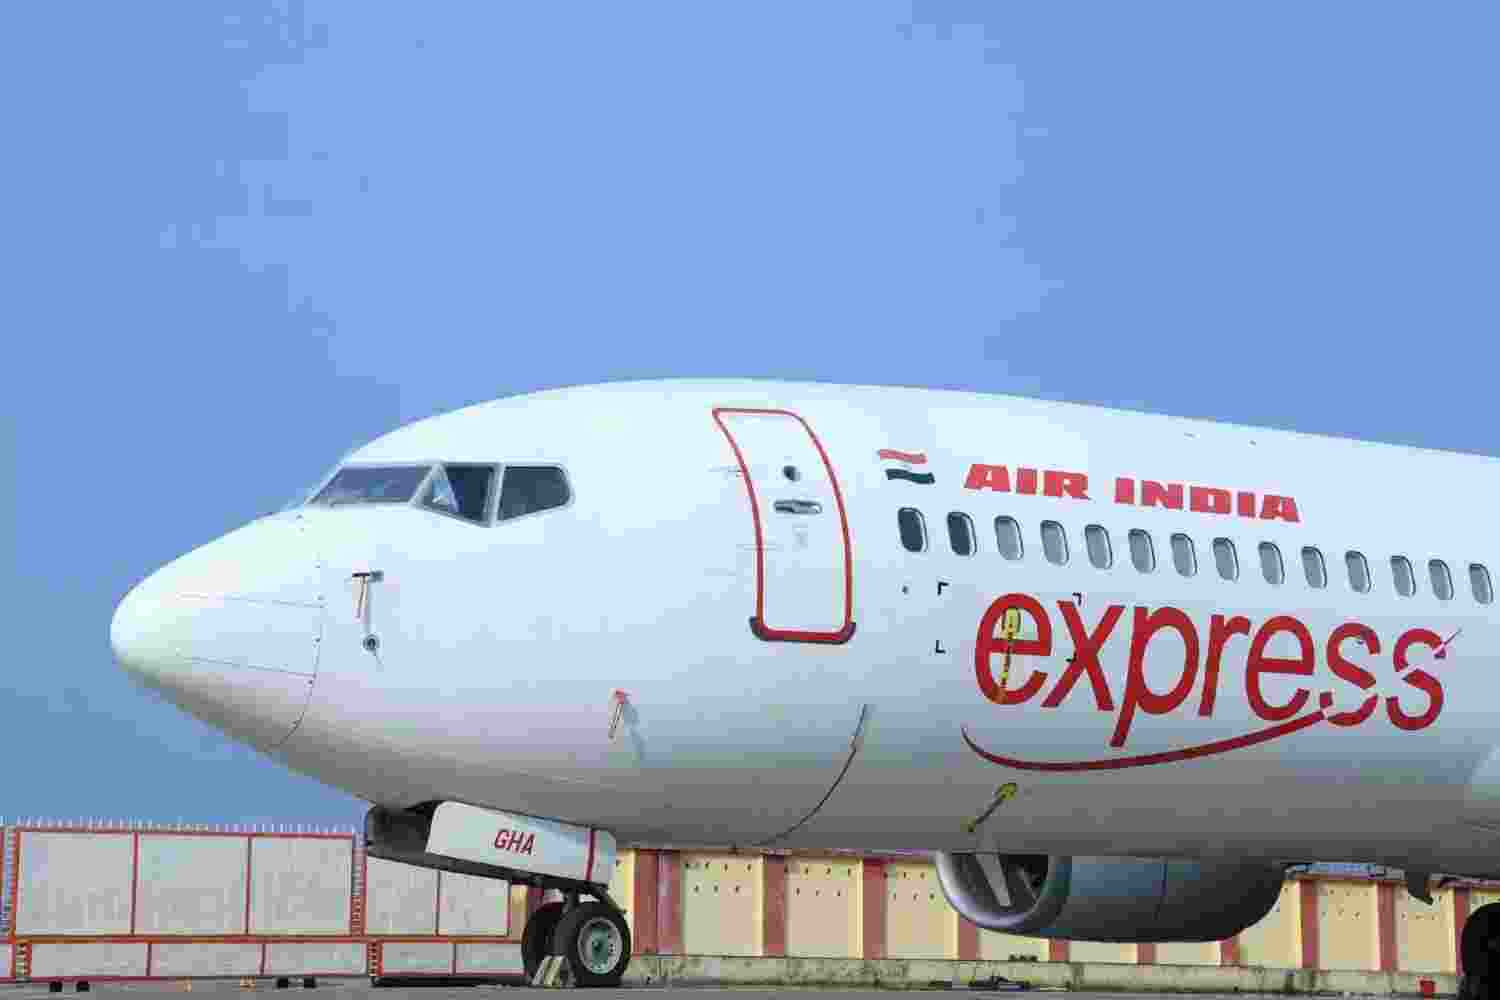 Air India Express fires 25 cabin crew members after mass sick leave protest